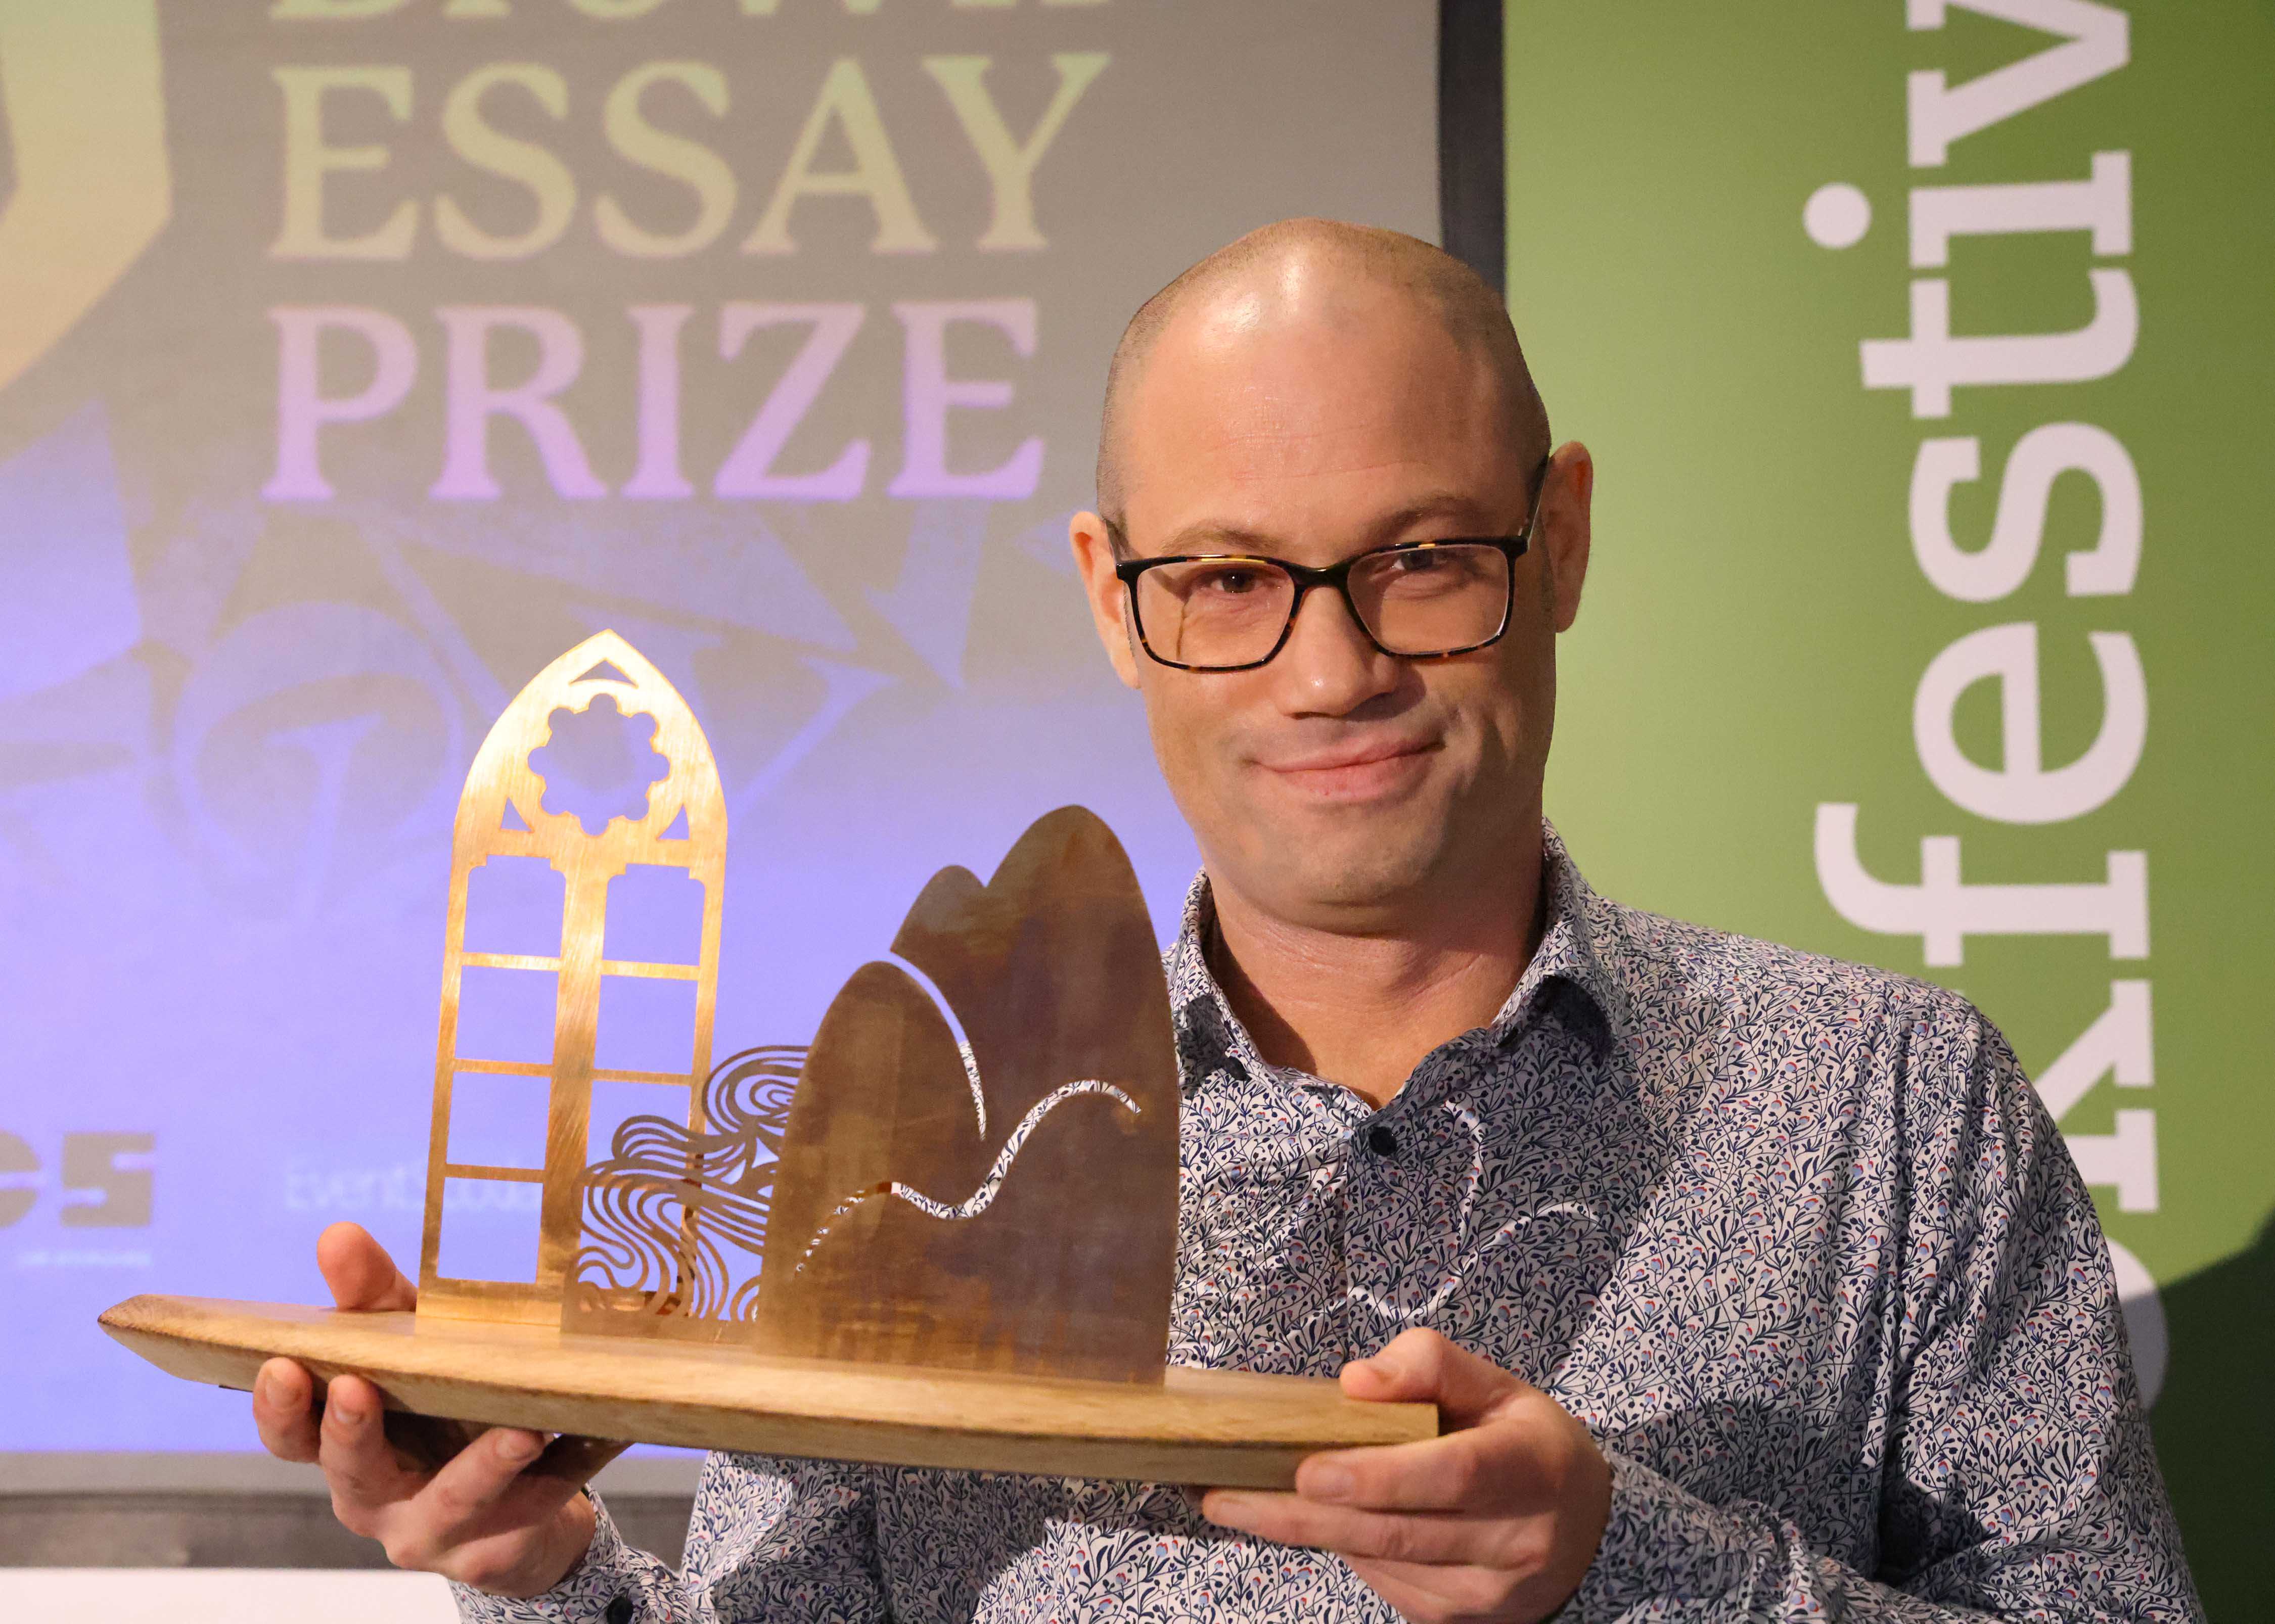 Anne Brown Prize Winner Rodge Glass holding his trophy on stage at the Wigtown Book Festival.